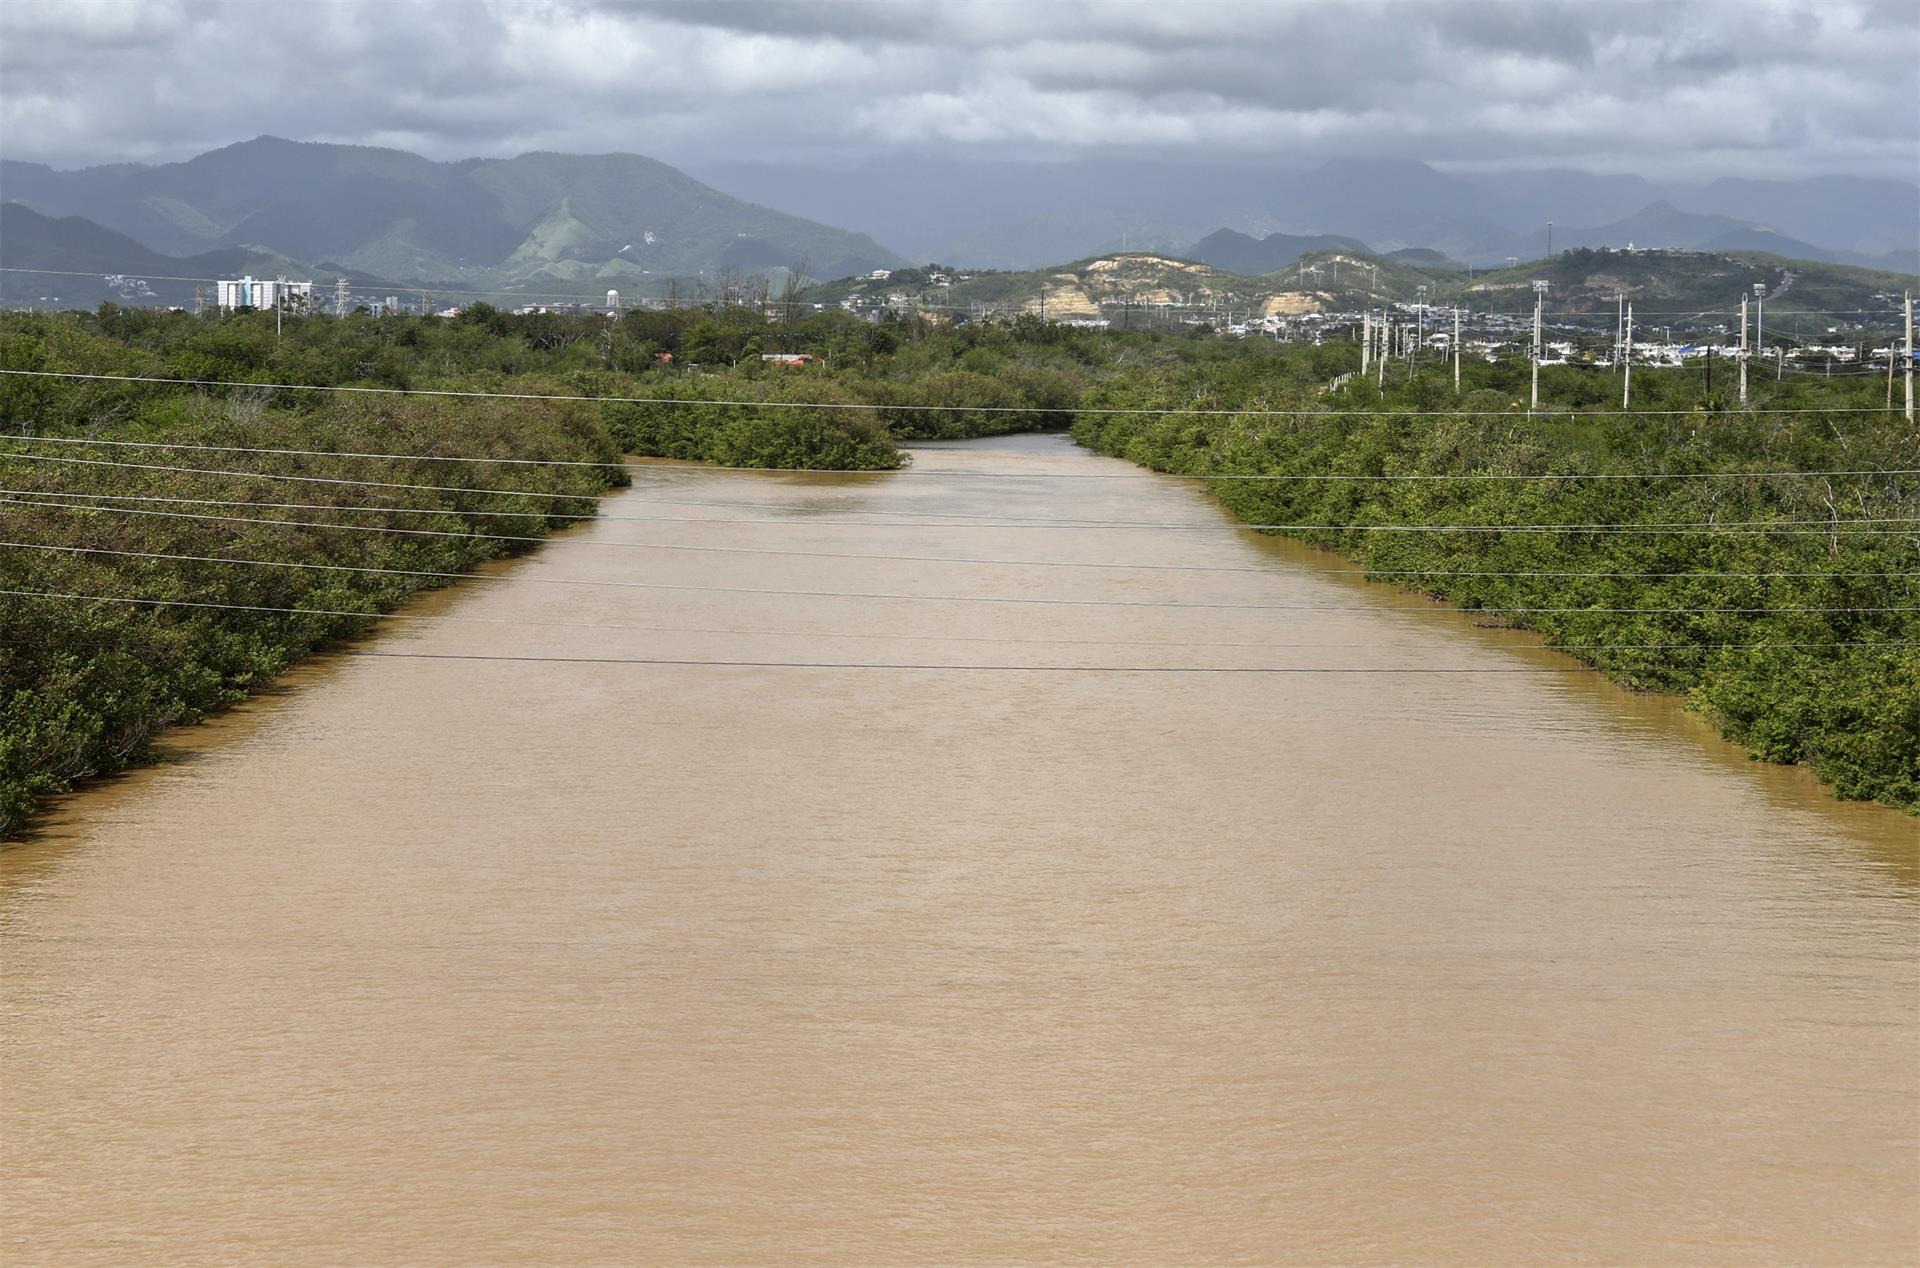 Photograph from this Wednesday showing a river in flood due to the passage of Hurricane Fiona in Ponce, Puerto Rico.  EFE / Thais Llorca